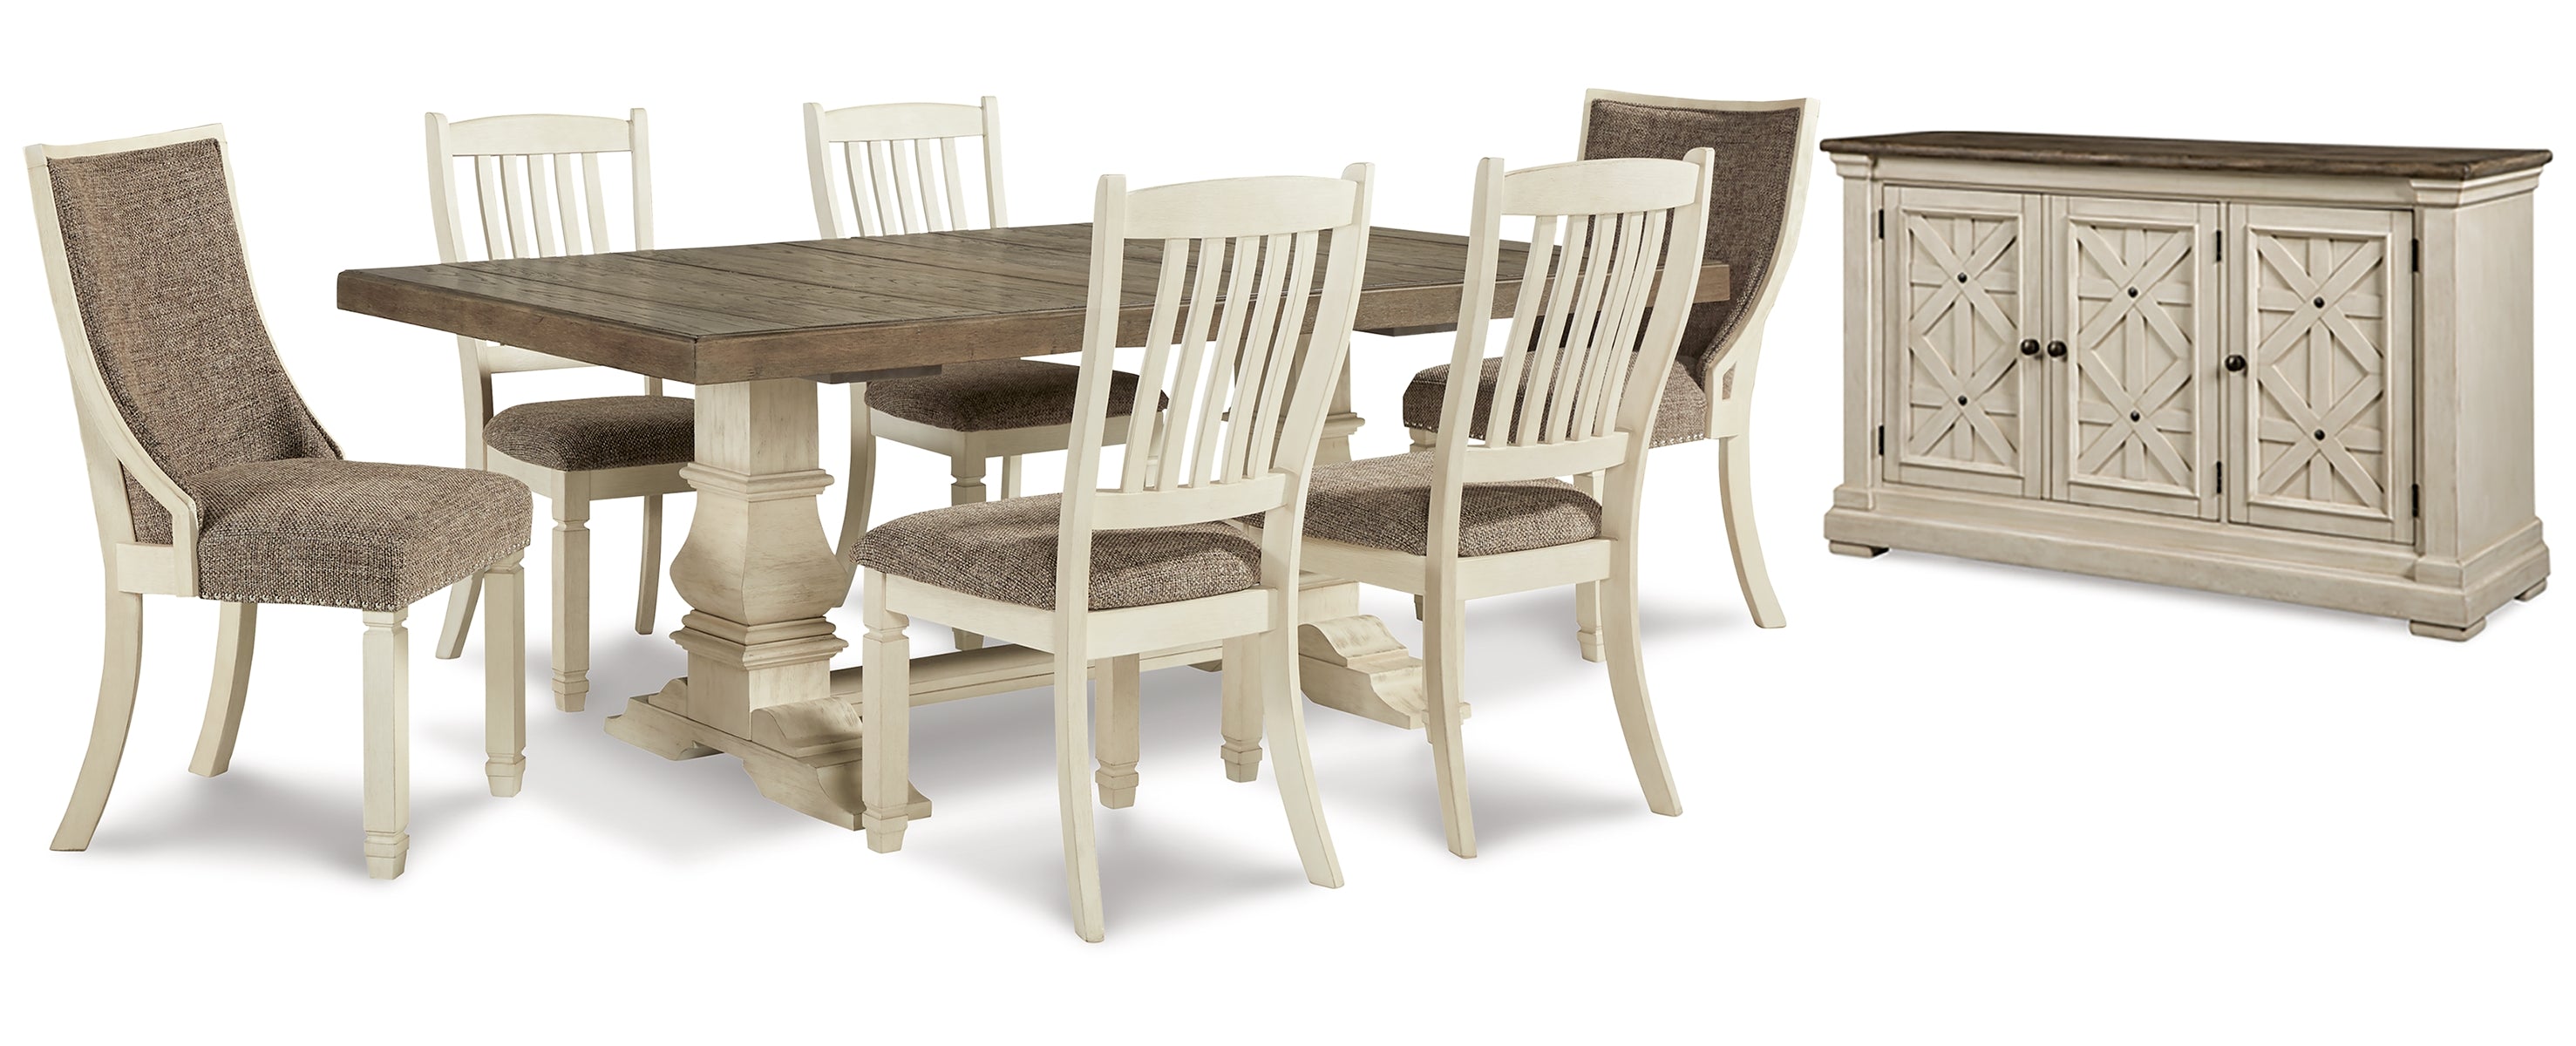 Bolanburg Dining Table and 6 Chairs with Storage